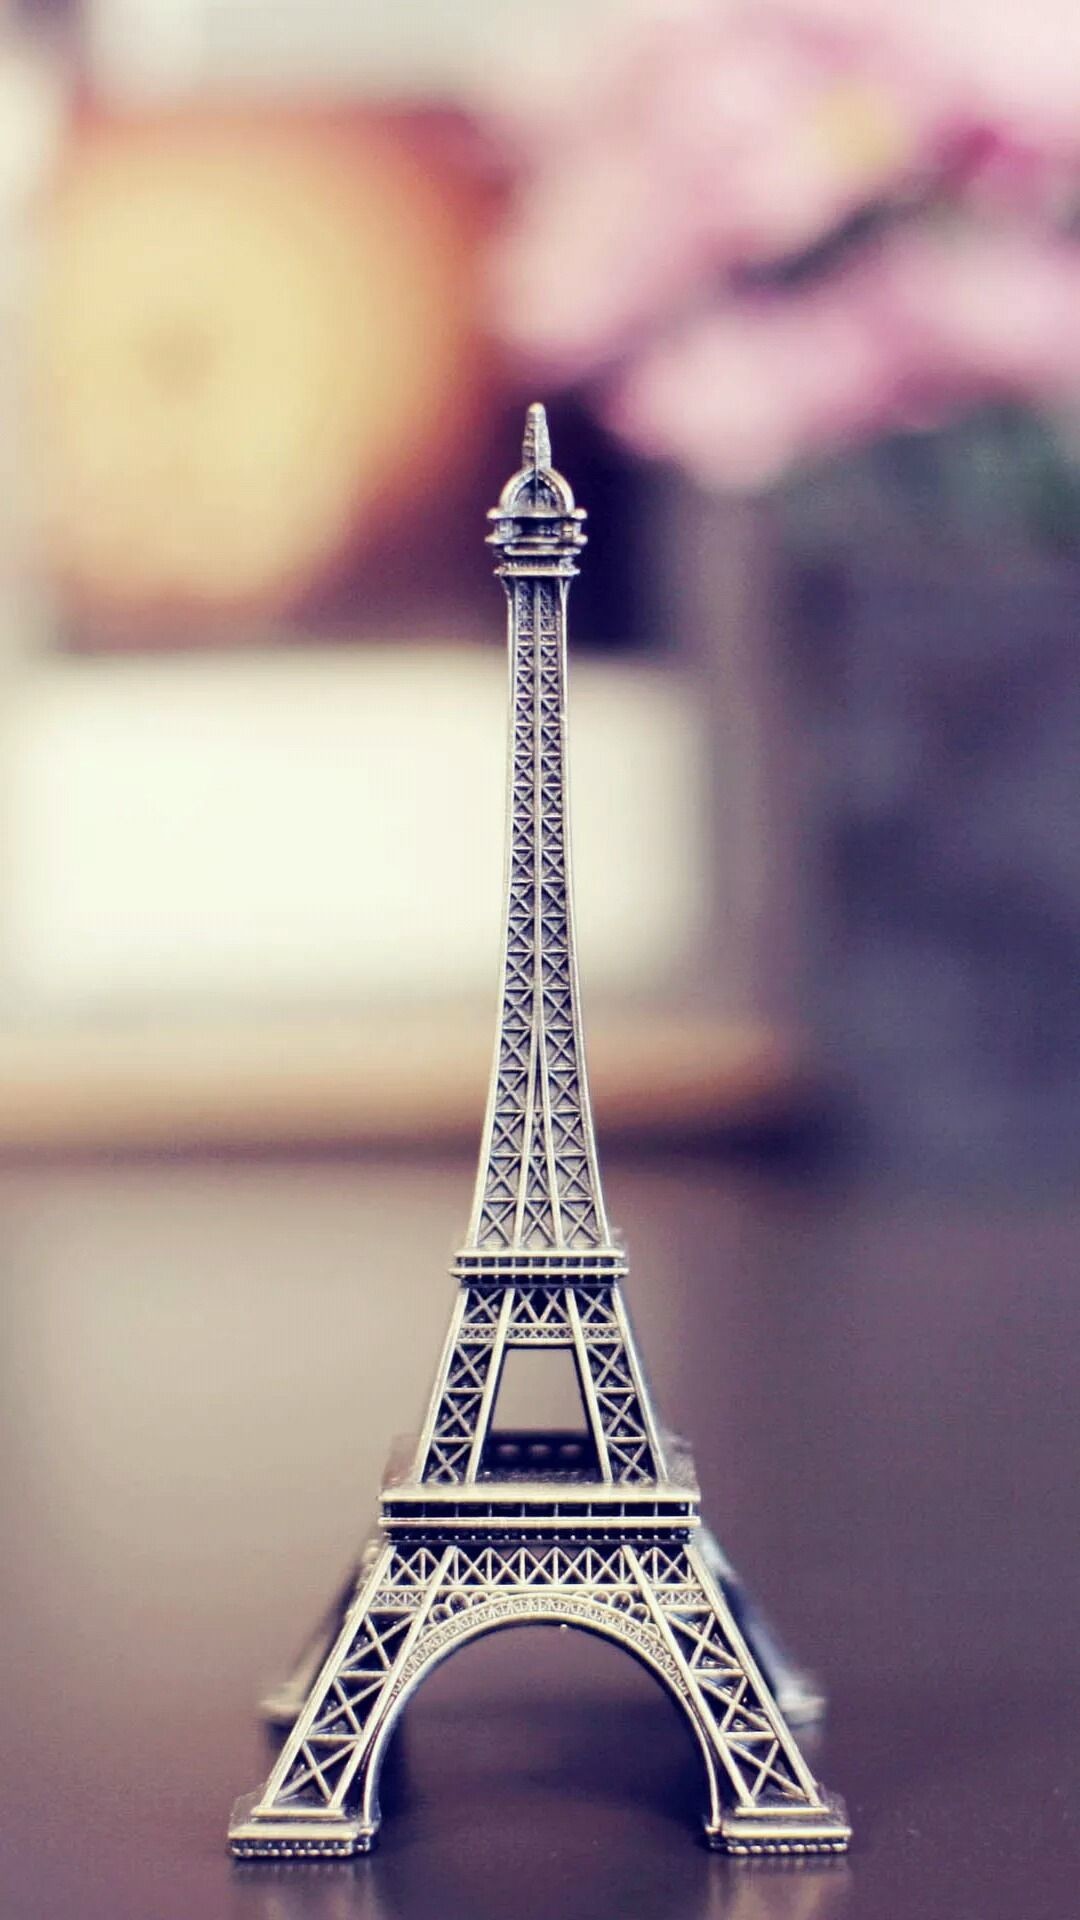 1080x1920 Vintage Eiffel Tower,Paris iPhone wallpapers. Romance City. Tap to see  more! @mobile9